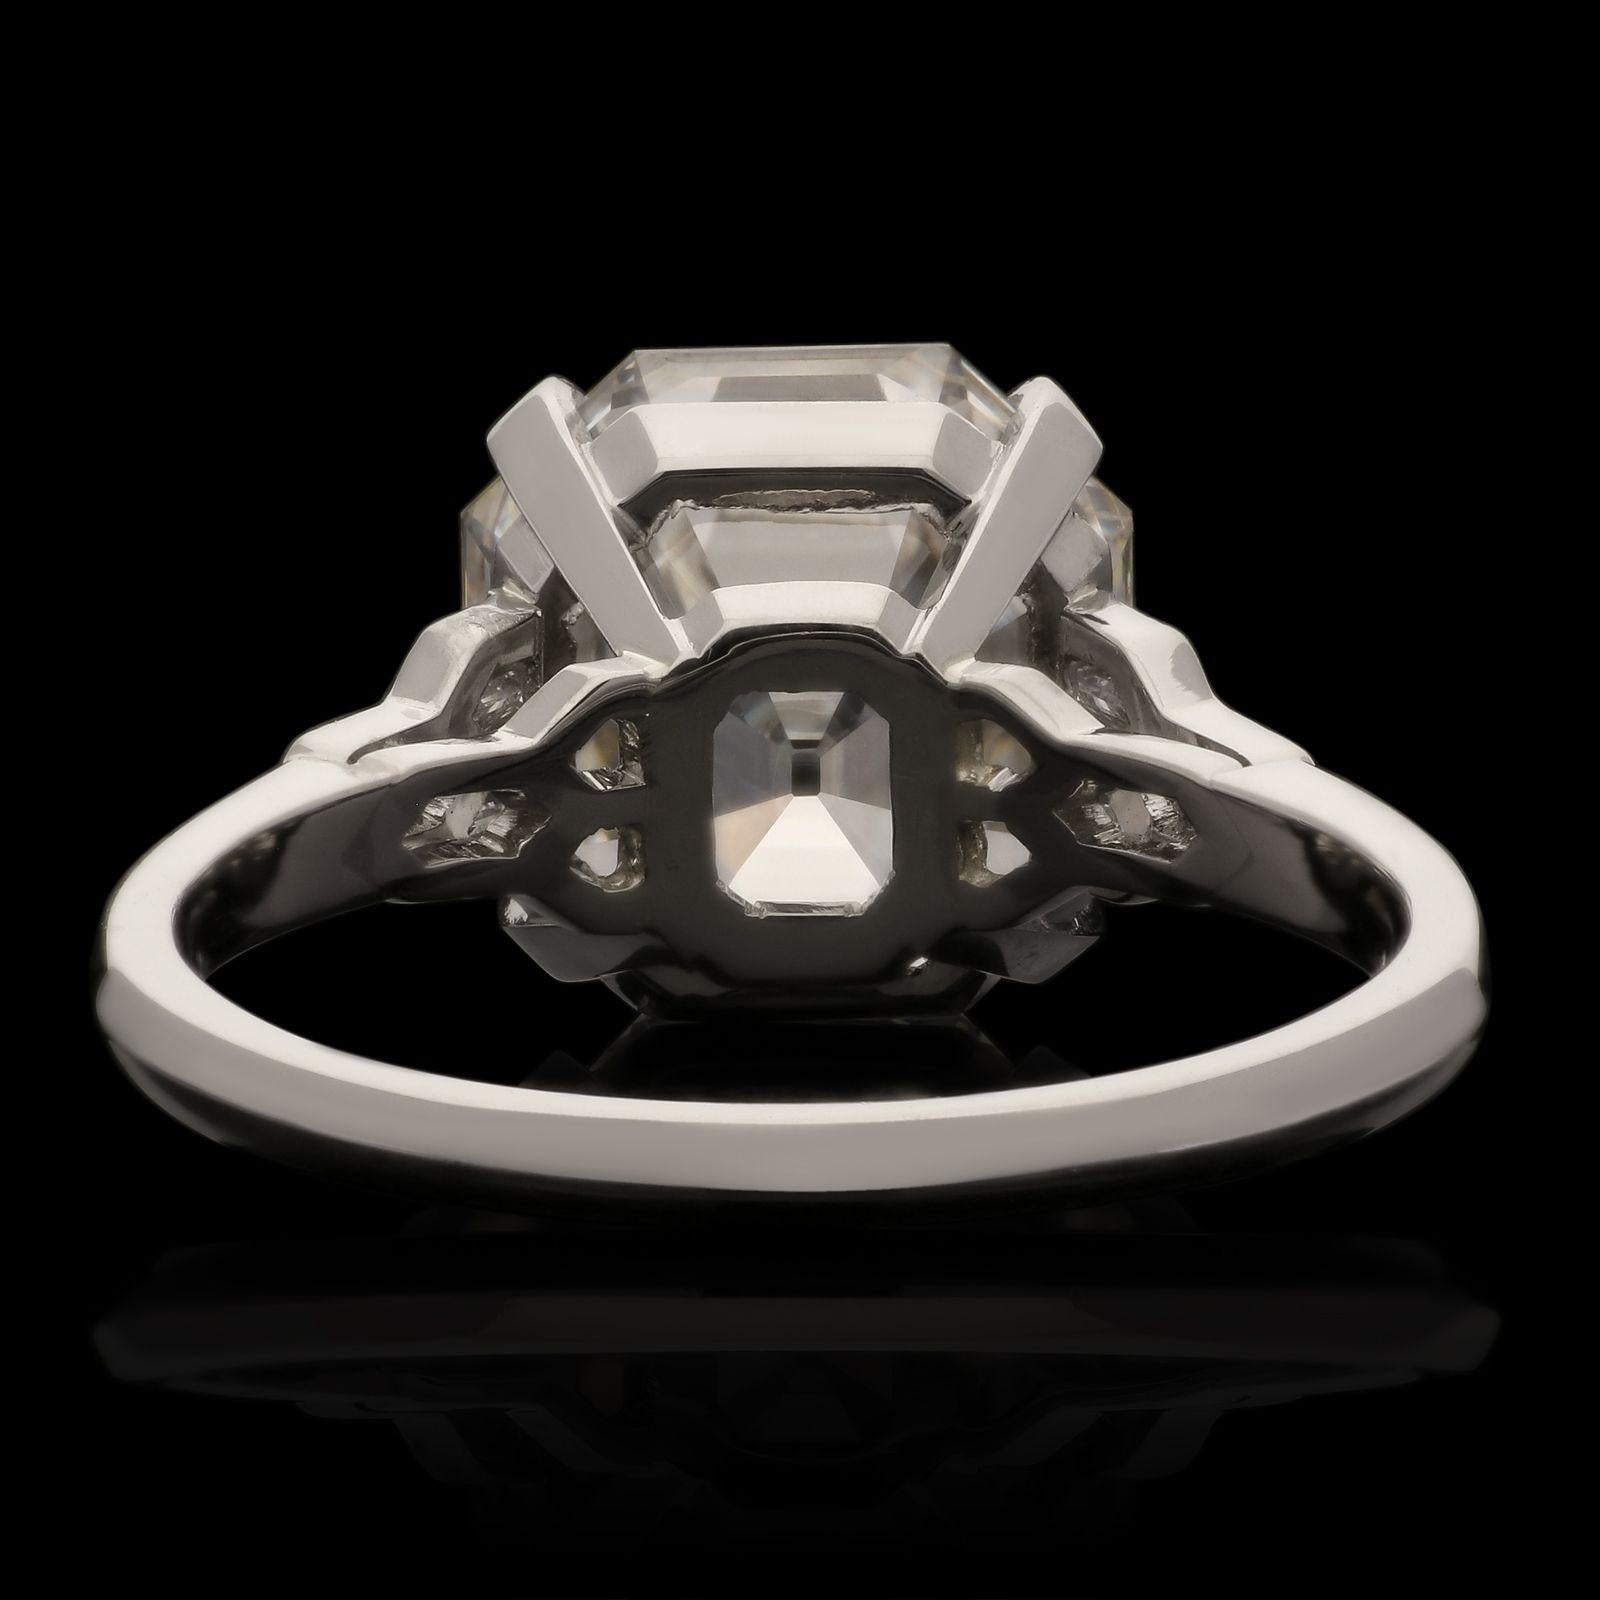 Hancocks 5.14ct Asscher Cut Diamond Ring With Honeycomb Shoulders Contemporary In New Condition For Sale In London, GB